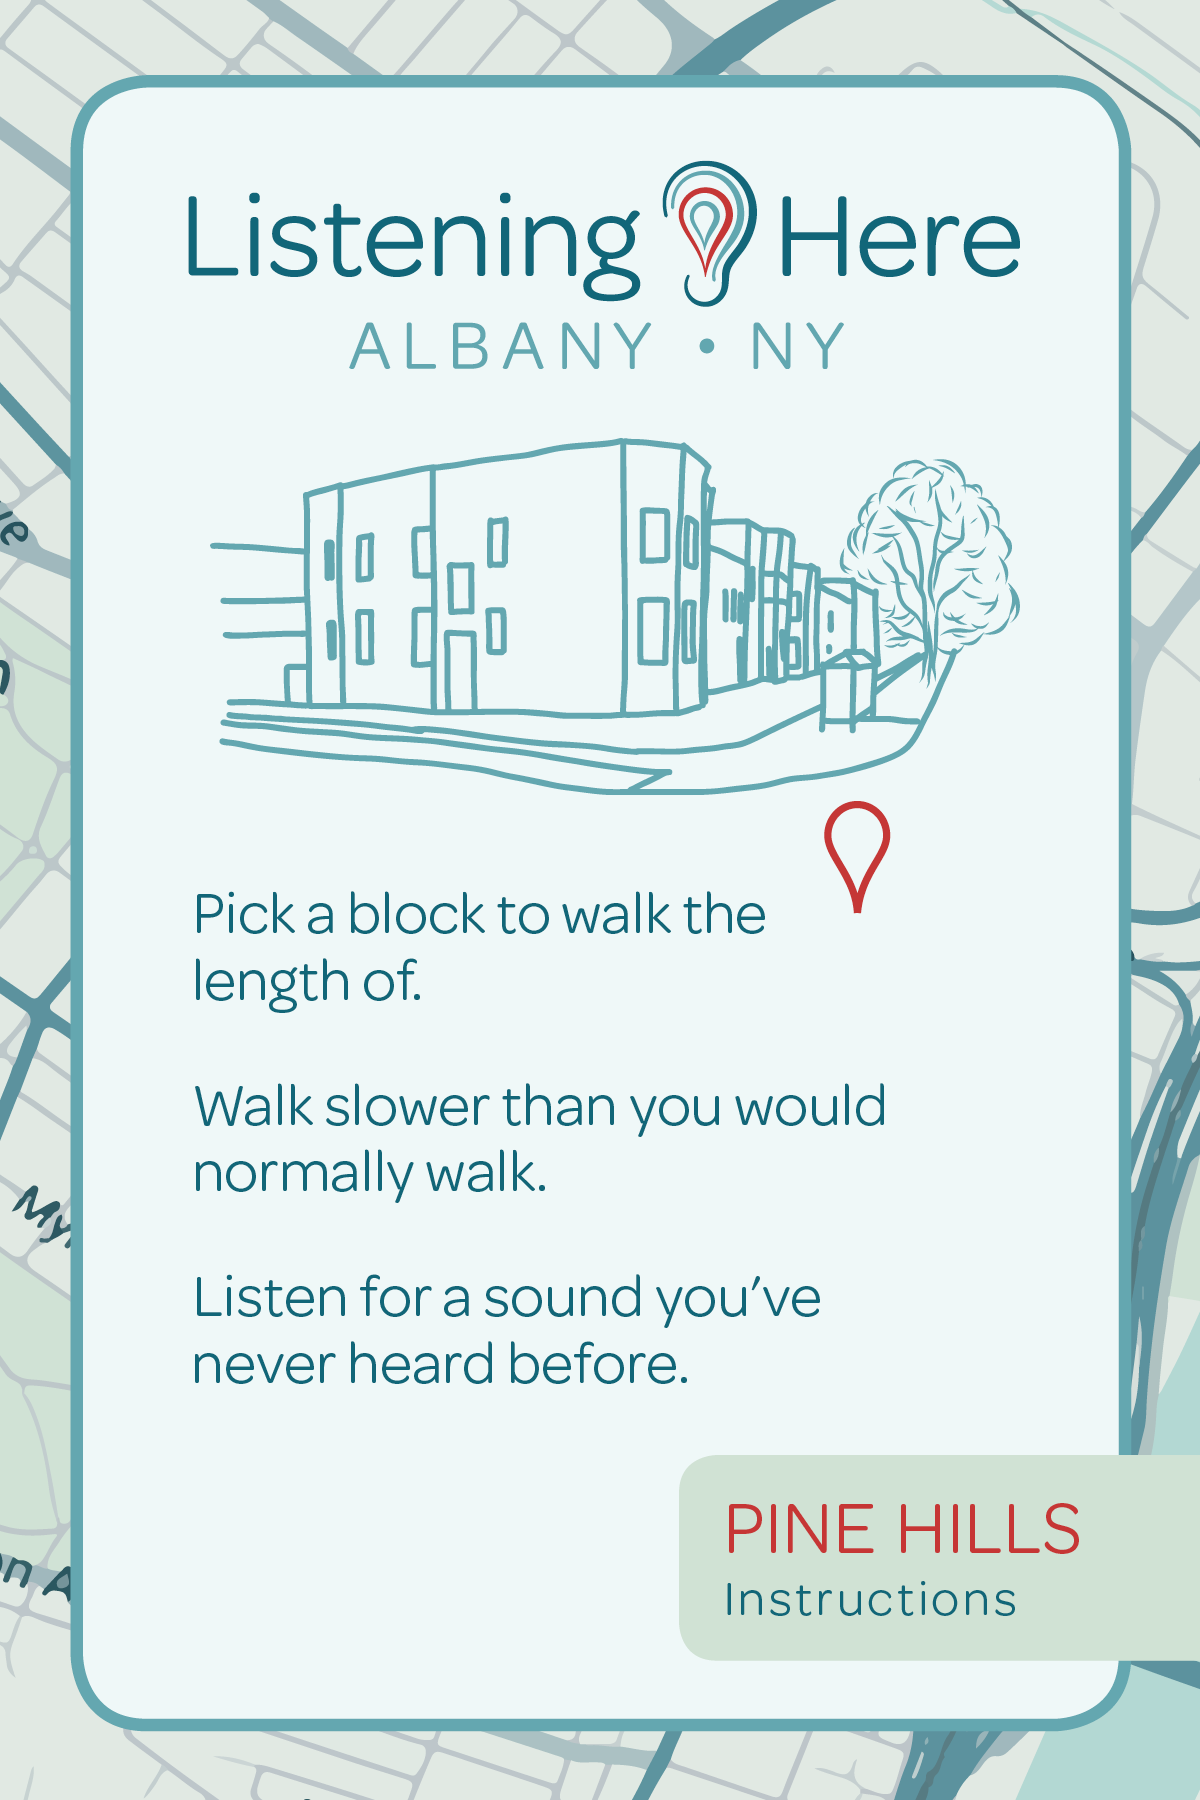 Listening HERE: Albany NY.    Pine Hills: Instructions.    Pick a block to walk the length of.    Walk slower than you would normally walk.    Listen for a sound you've never heard before.